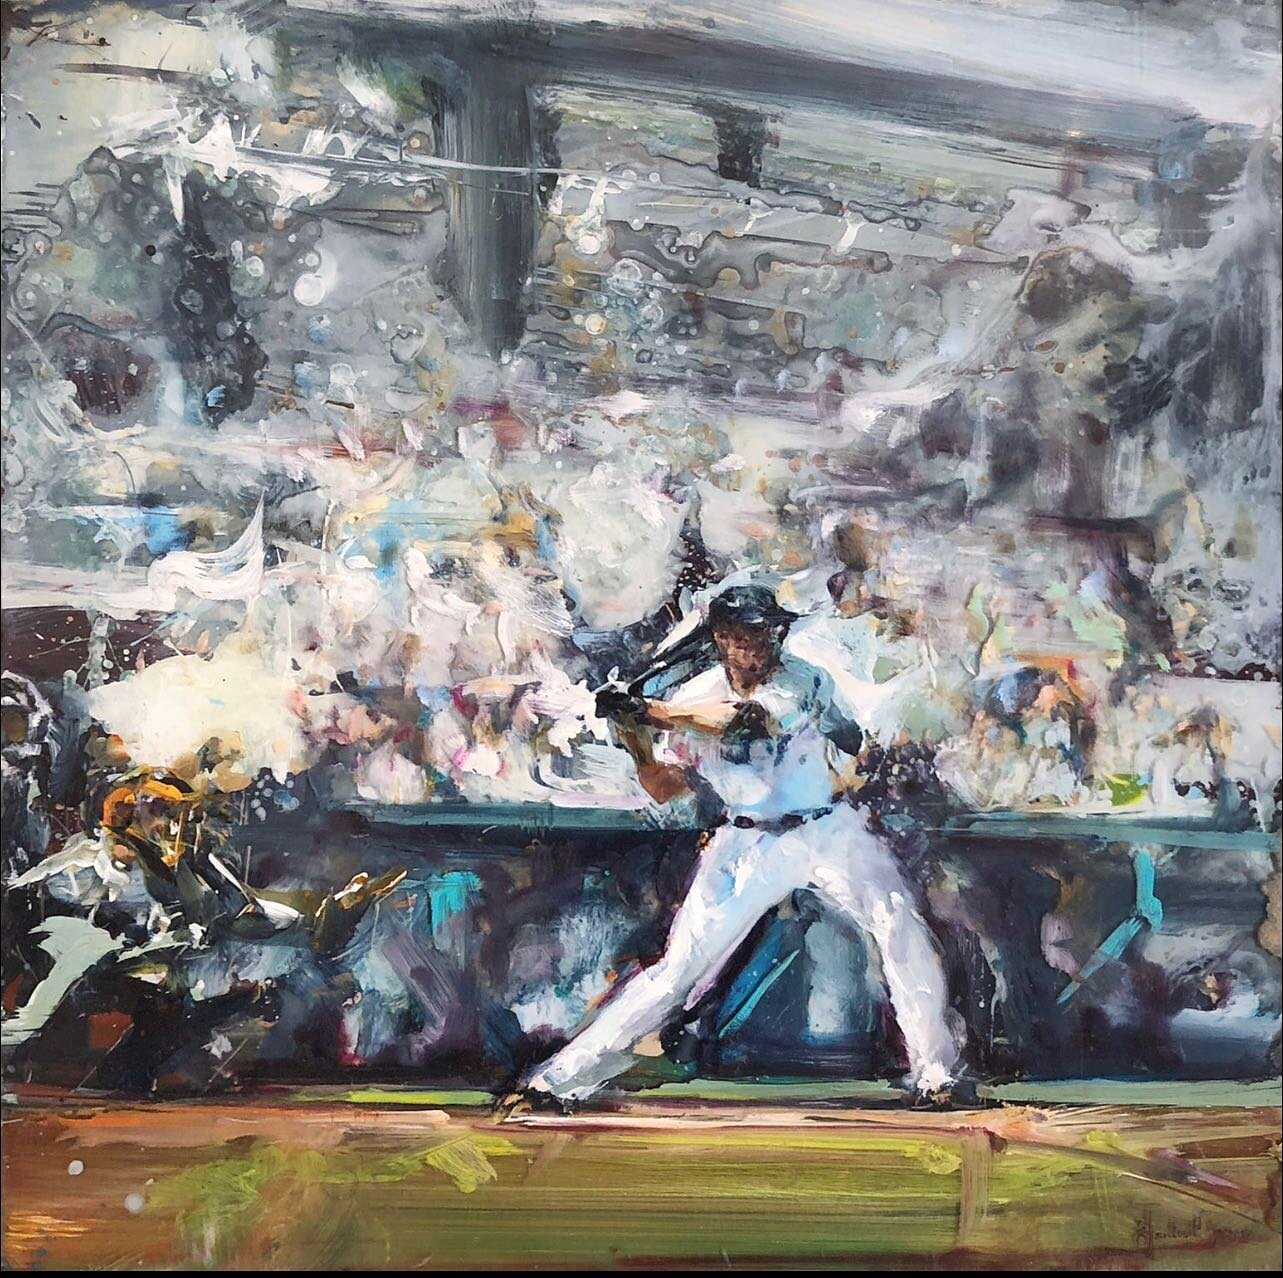 &ldquo;America&rsquo;s Game&rdquo;, Giancarlo Stanton, acrylic and oil, in the collection of Jackson Samuel Gilroy. Just gave this one to my grandson for his first birthday. Limited Editions available in dye infusion on aluminum. &mdash;&mdash;&mdash